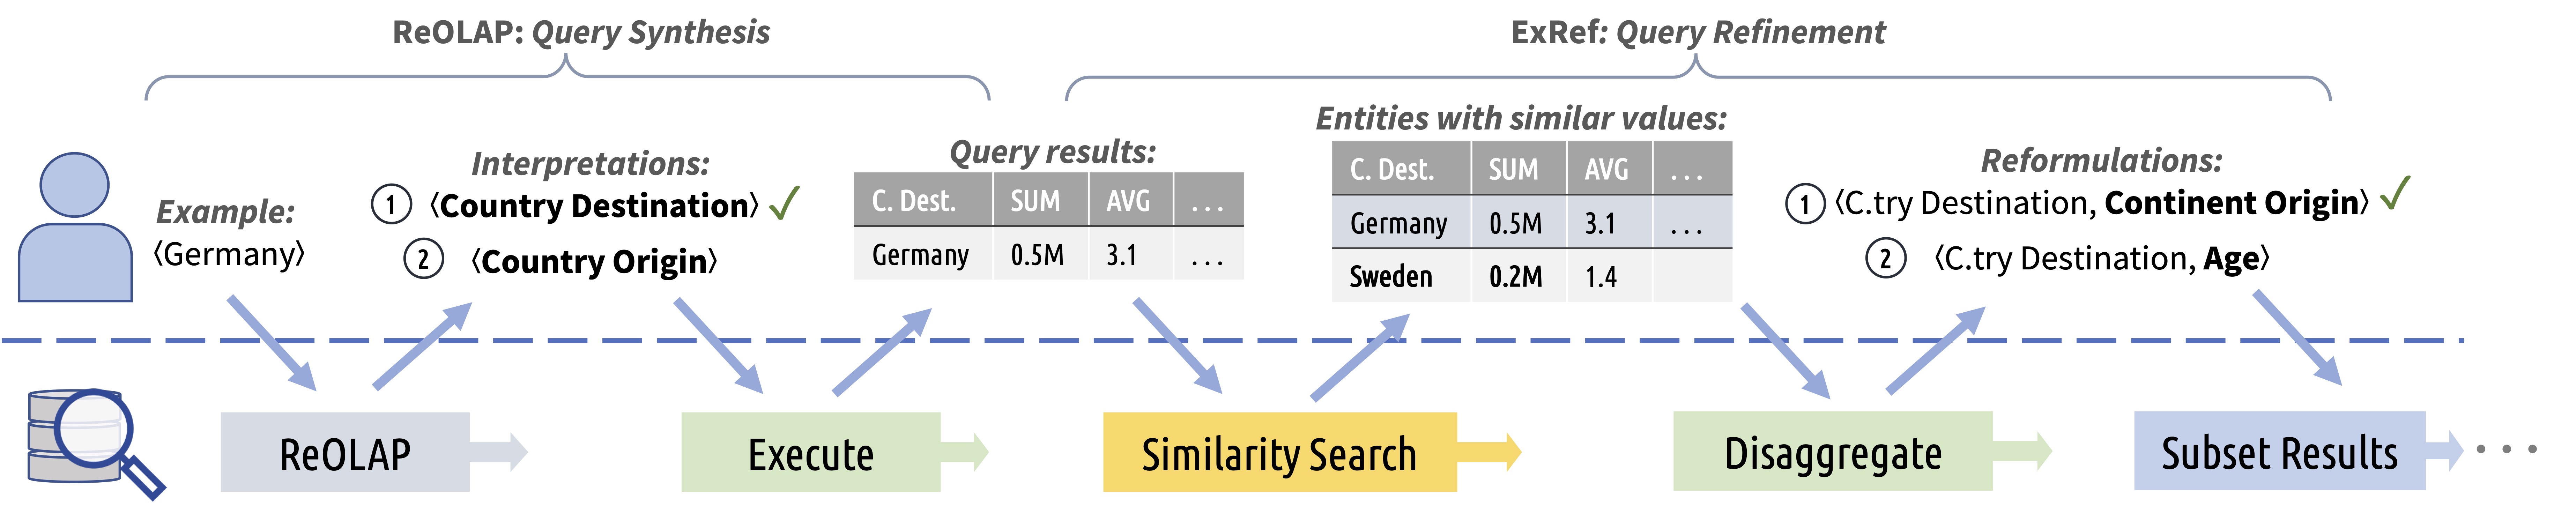 The Exploratory Workflow: from reverse engineering, to reformulation via similarity search, then disaggregate, then subset